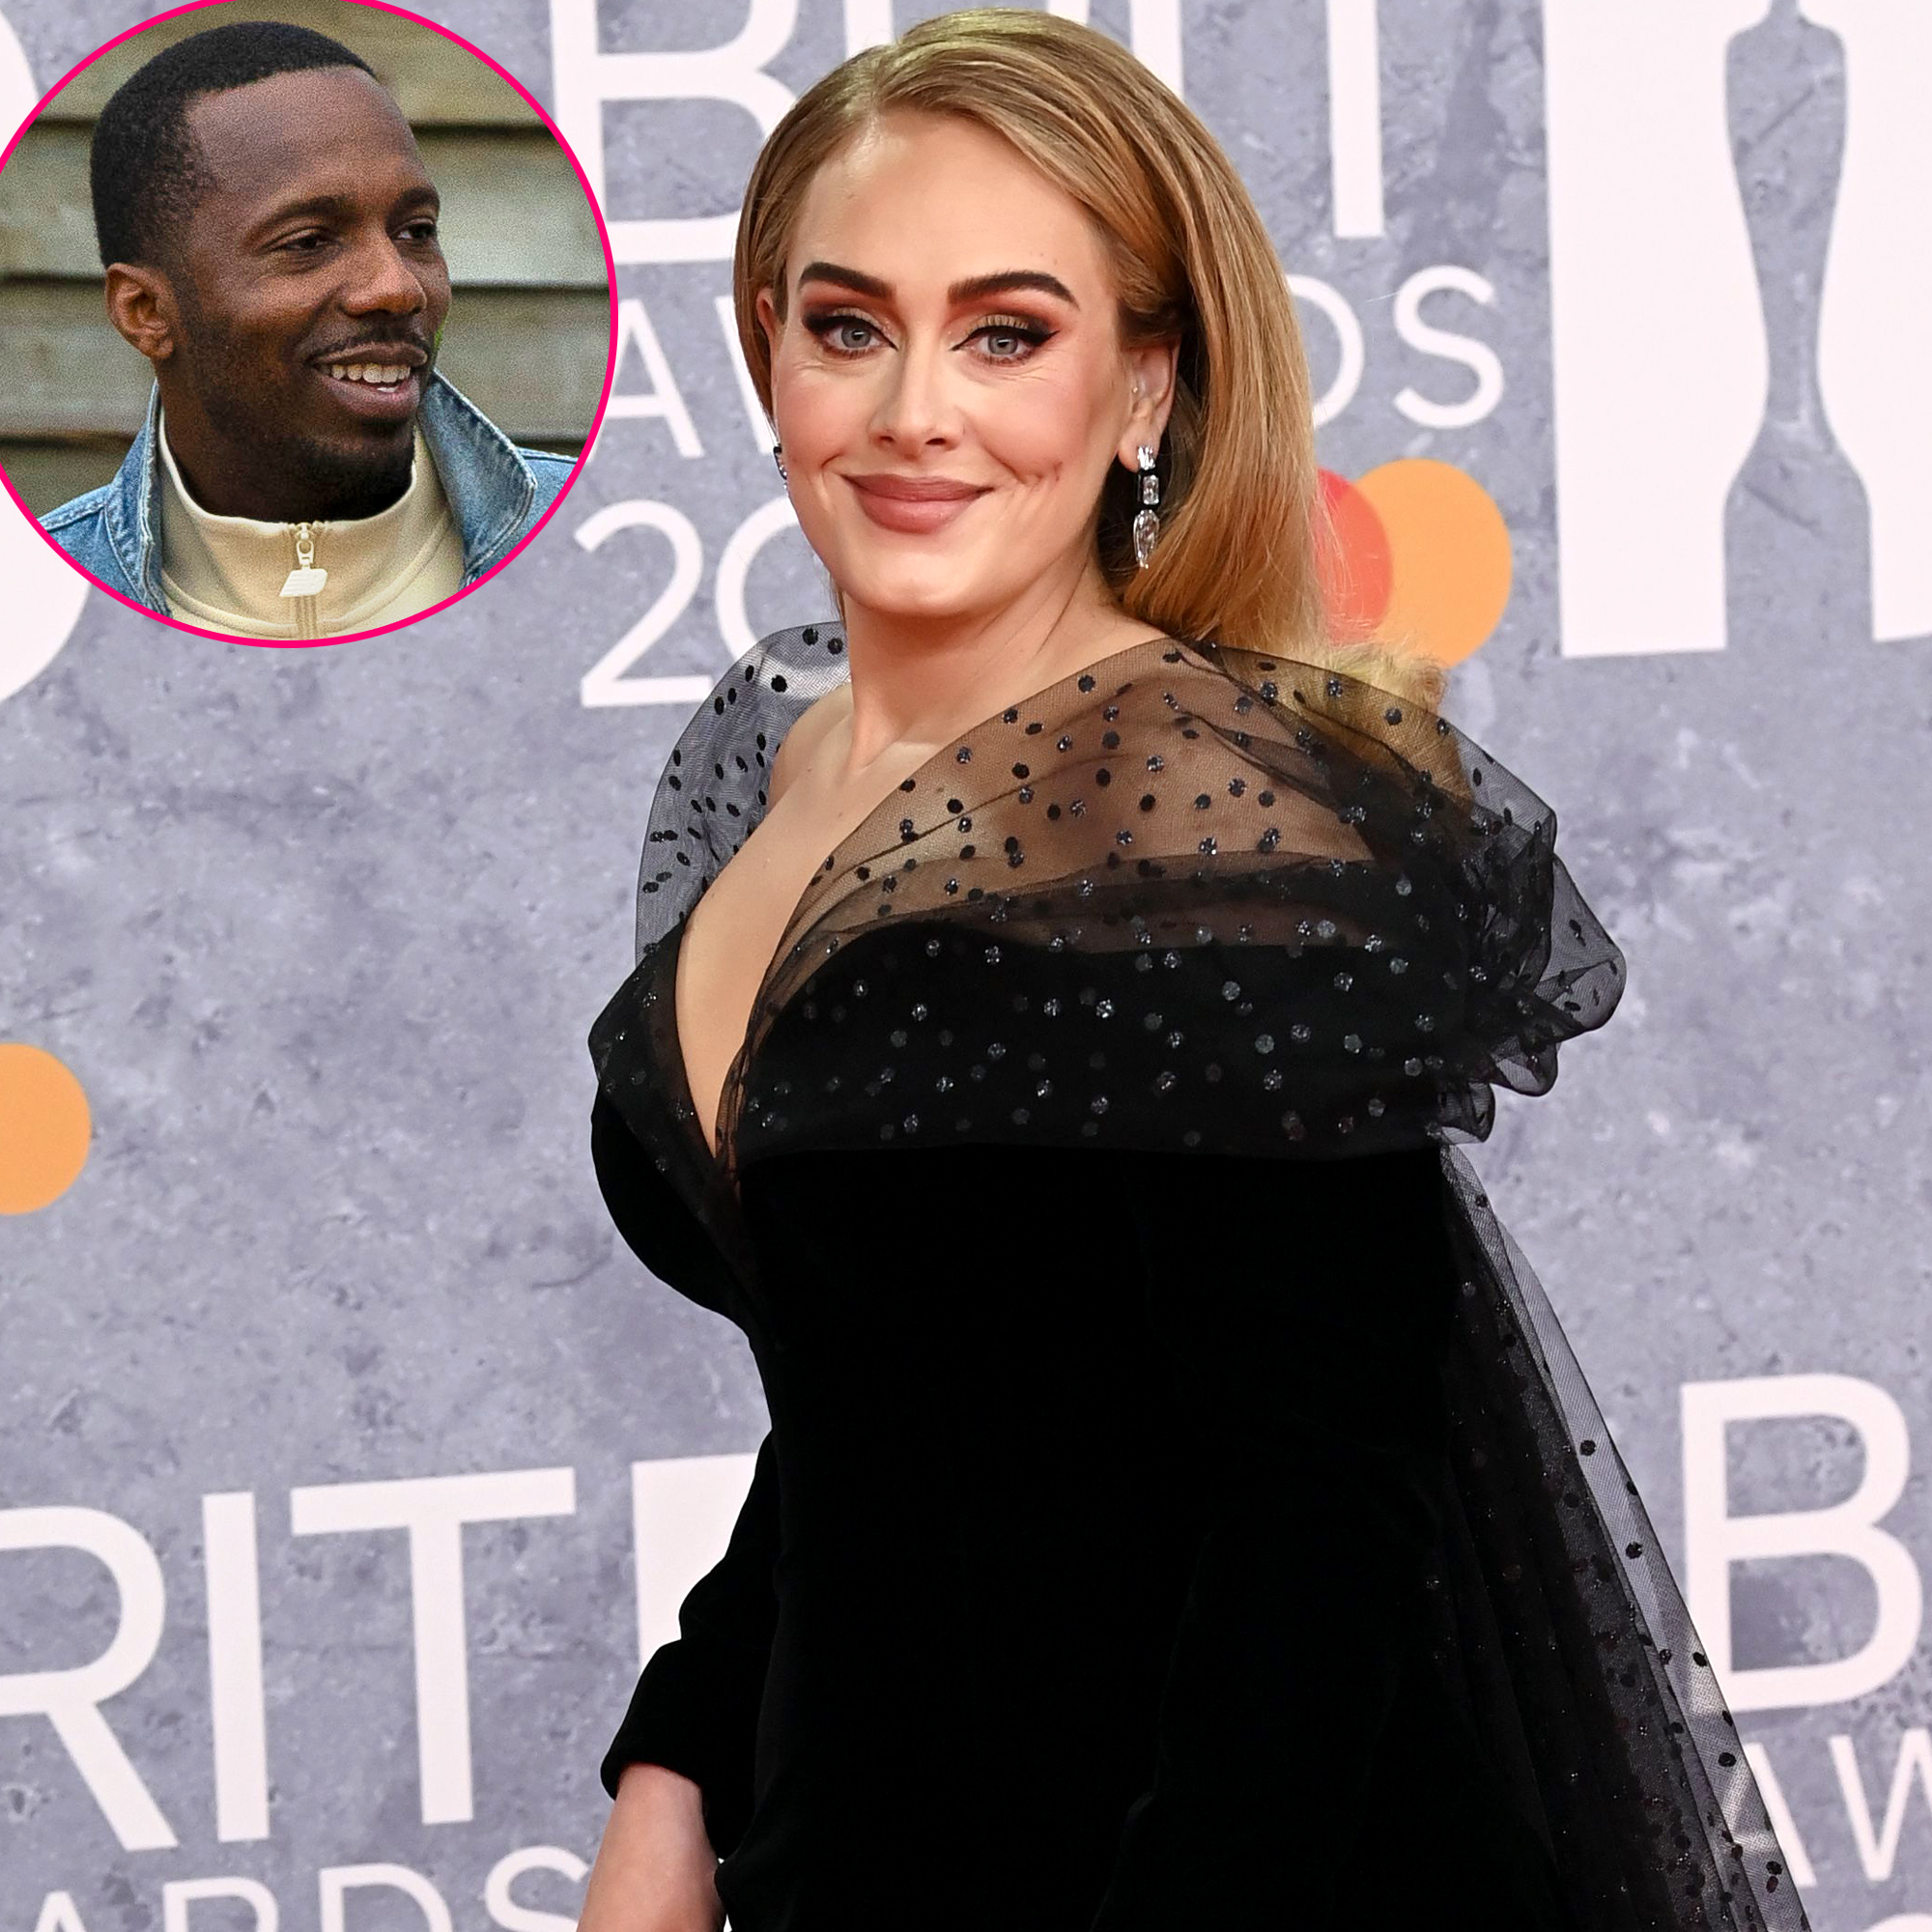 Are Adele and her boyfriend Rich Paul planning to have kids?